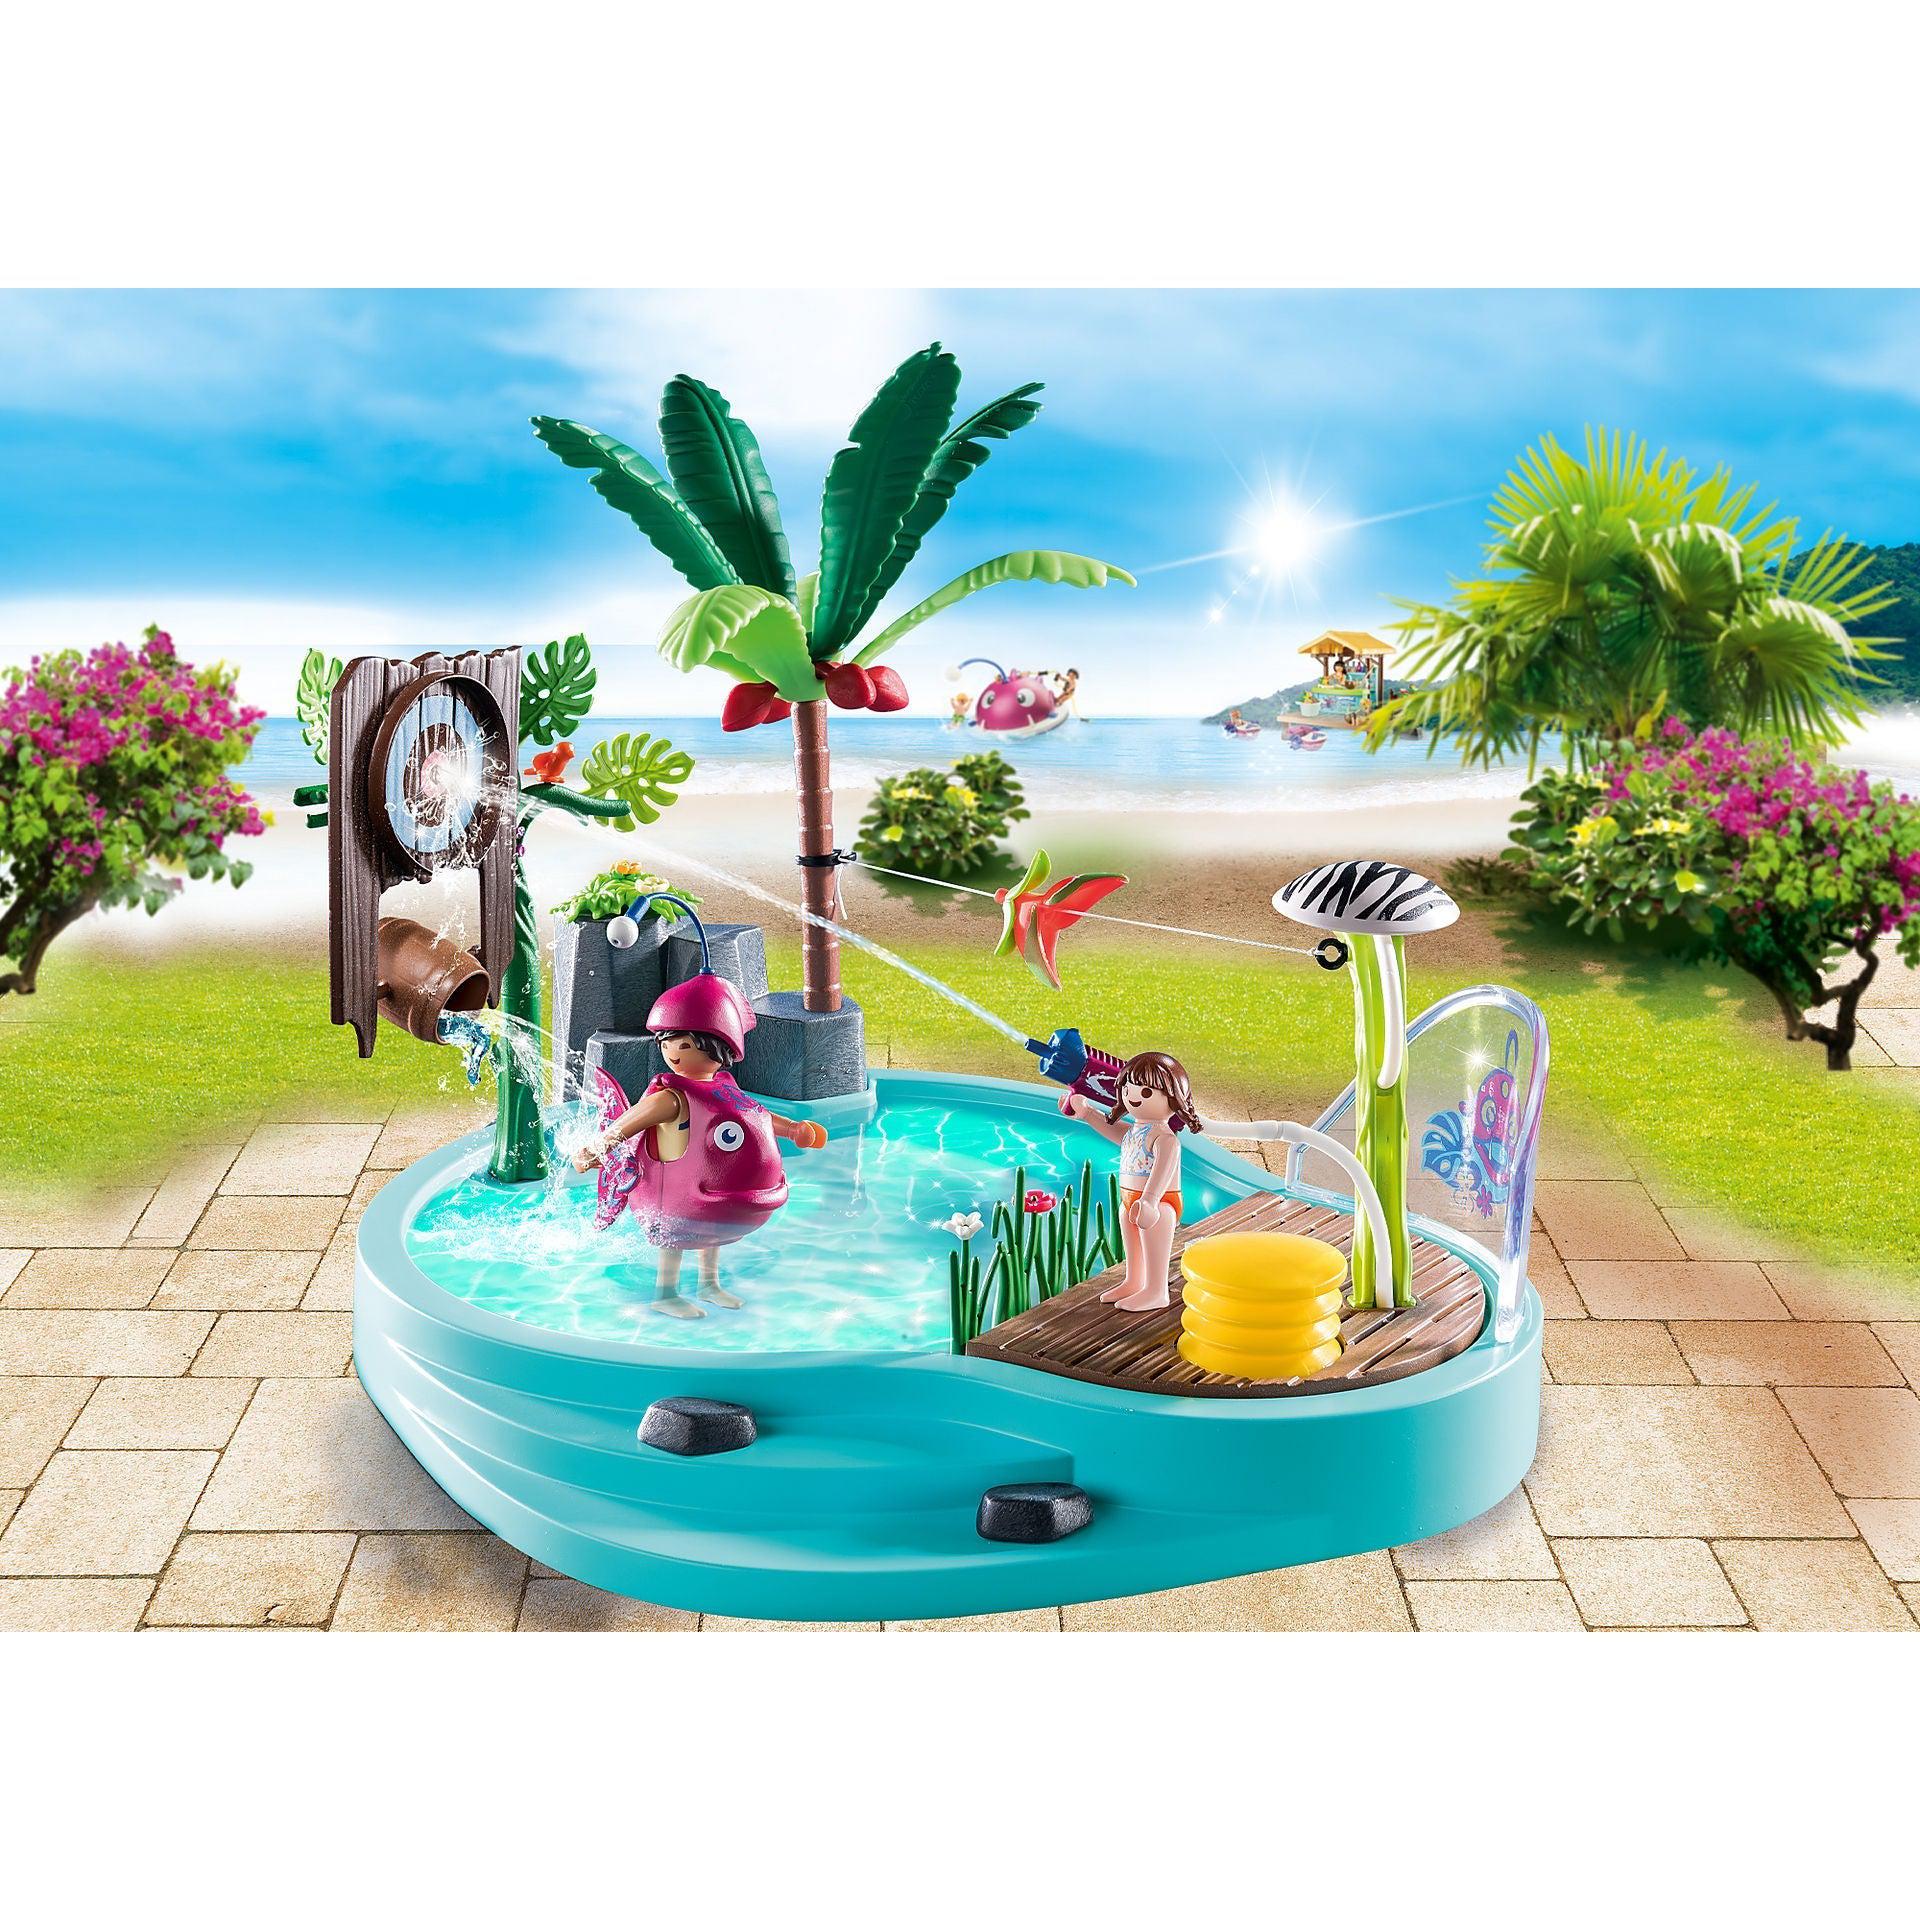 Playmobil-Family Fun - Small Pool with Water Sprayer-70610-Legacy Toys